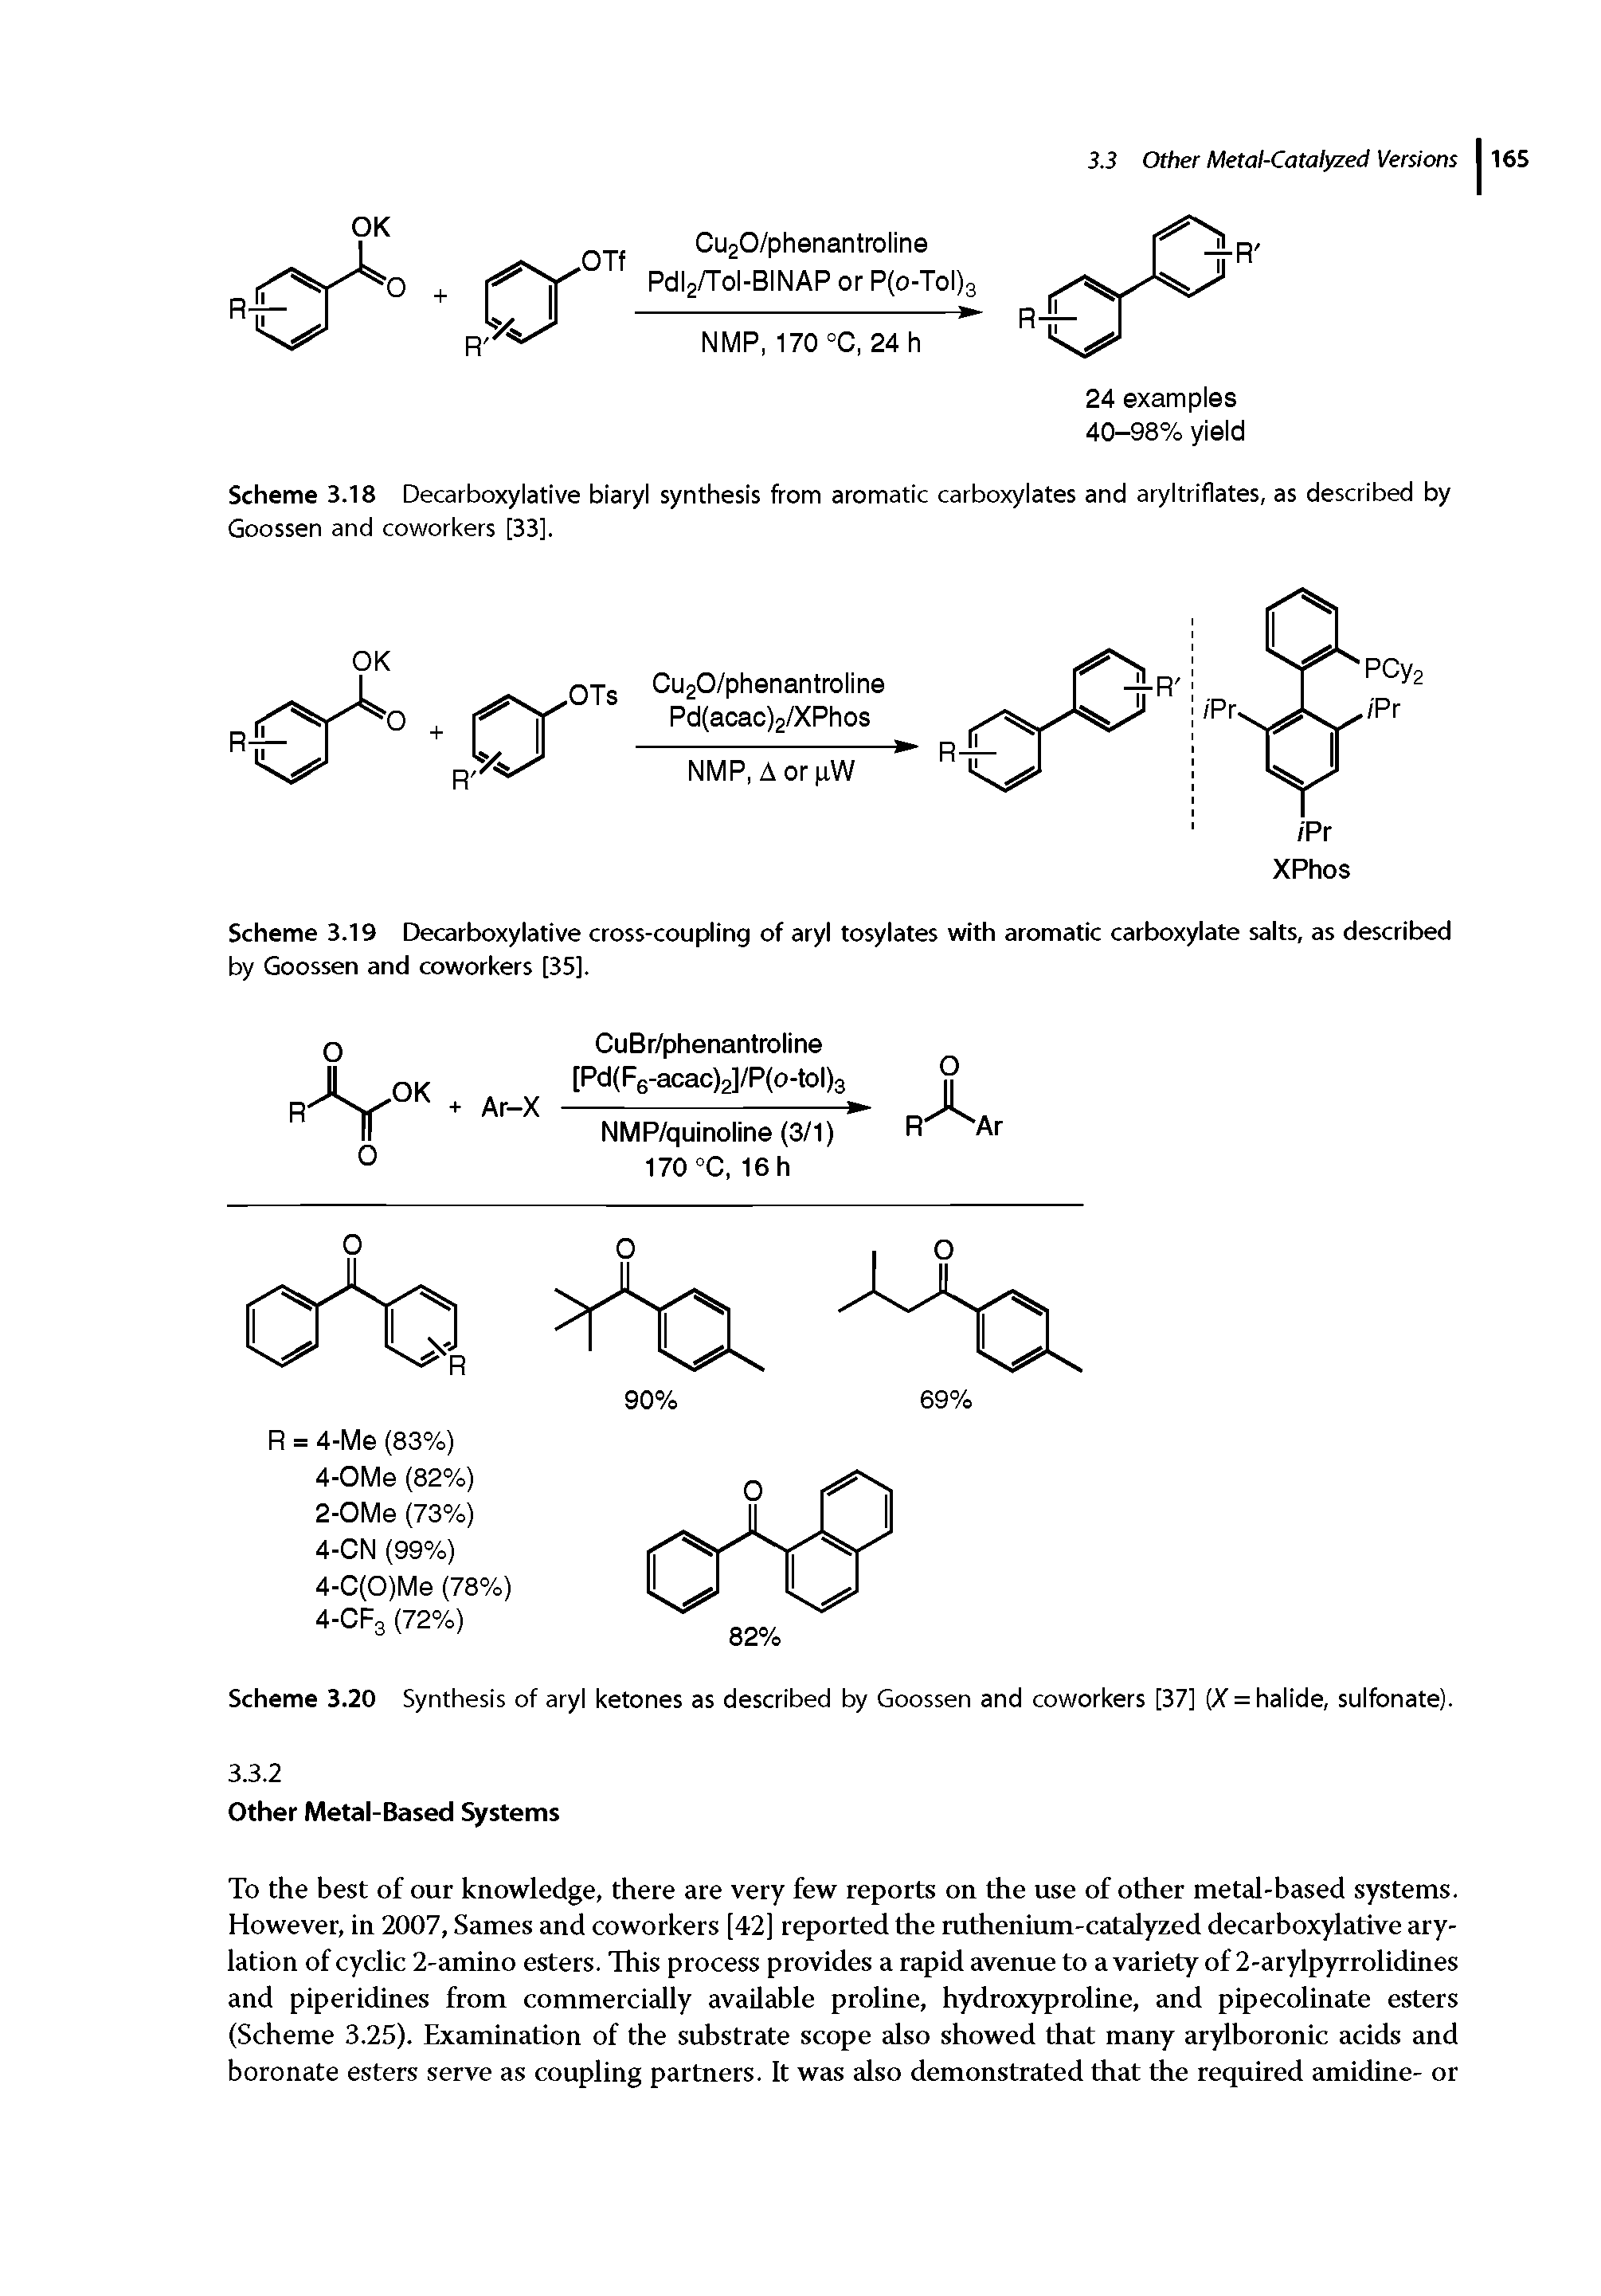 Scheme 3.19 Decarboxylative cross-coupling of aryl tosylates with aromatic carboxylate salts, as described by Goossen and coworkers [35].